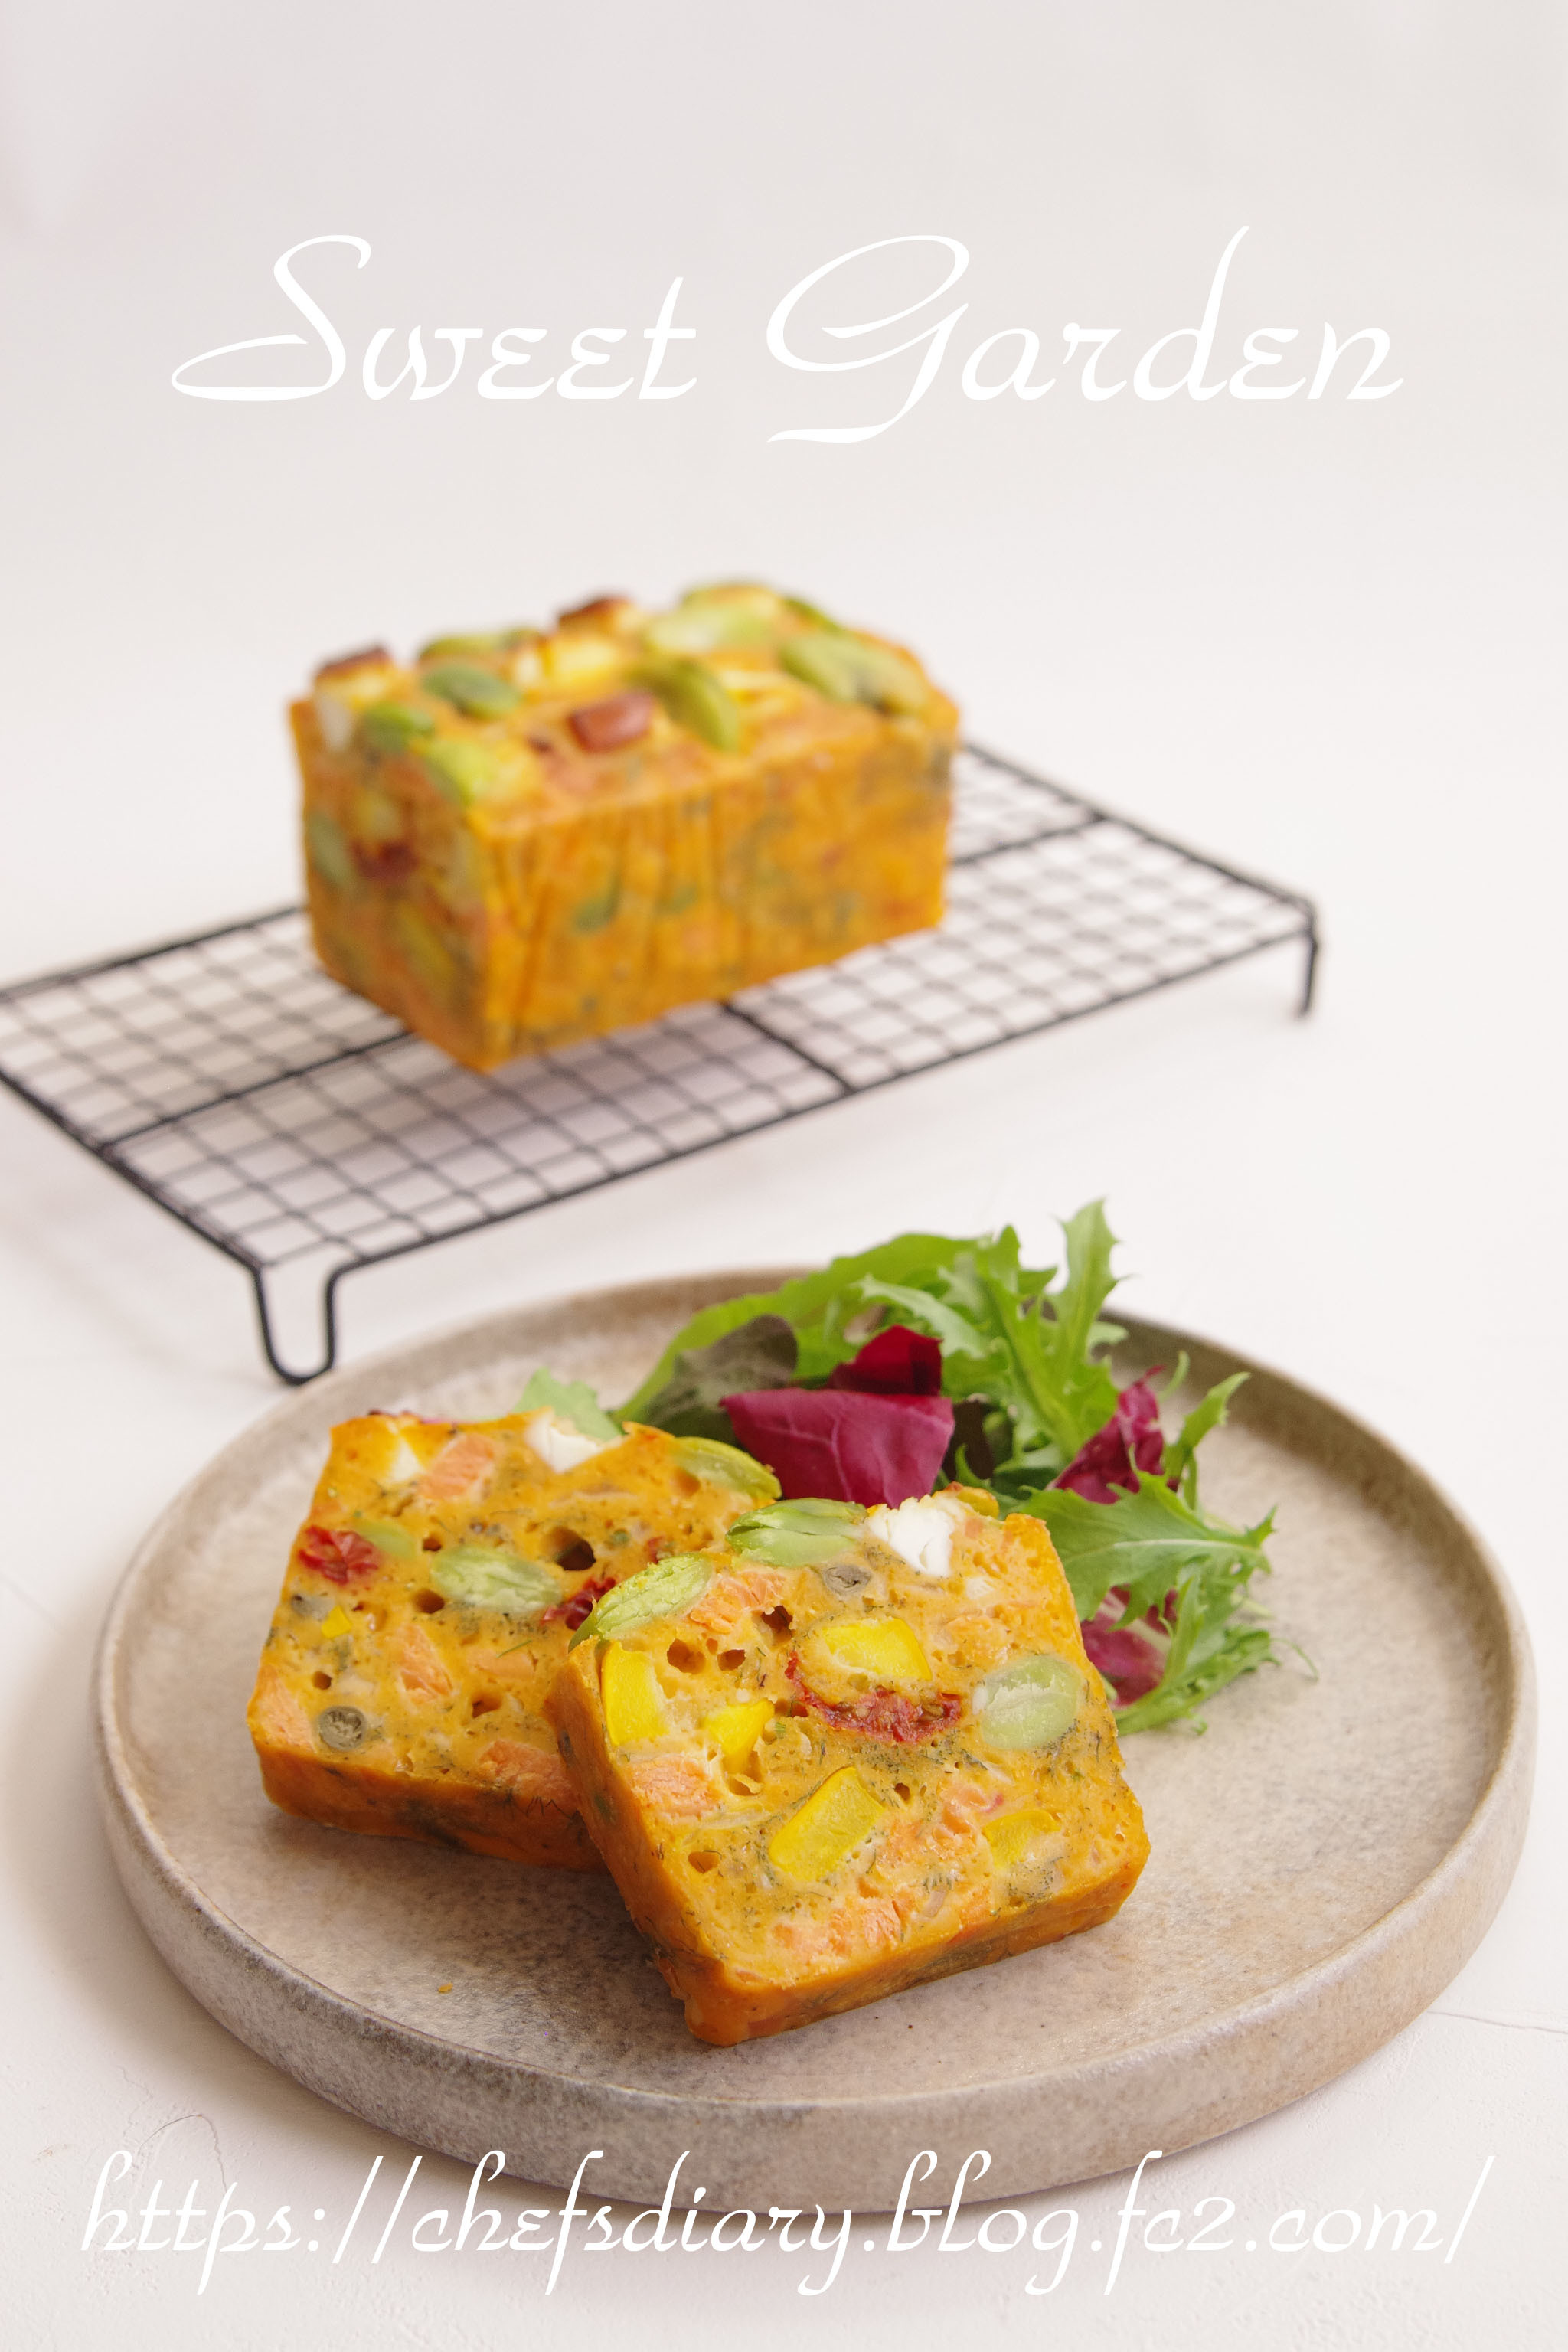 French Savory Cake with Salmon and Colorful Veggies　サーモンと彩り野菜のケークサレ